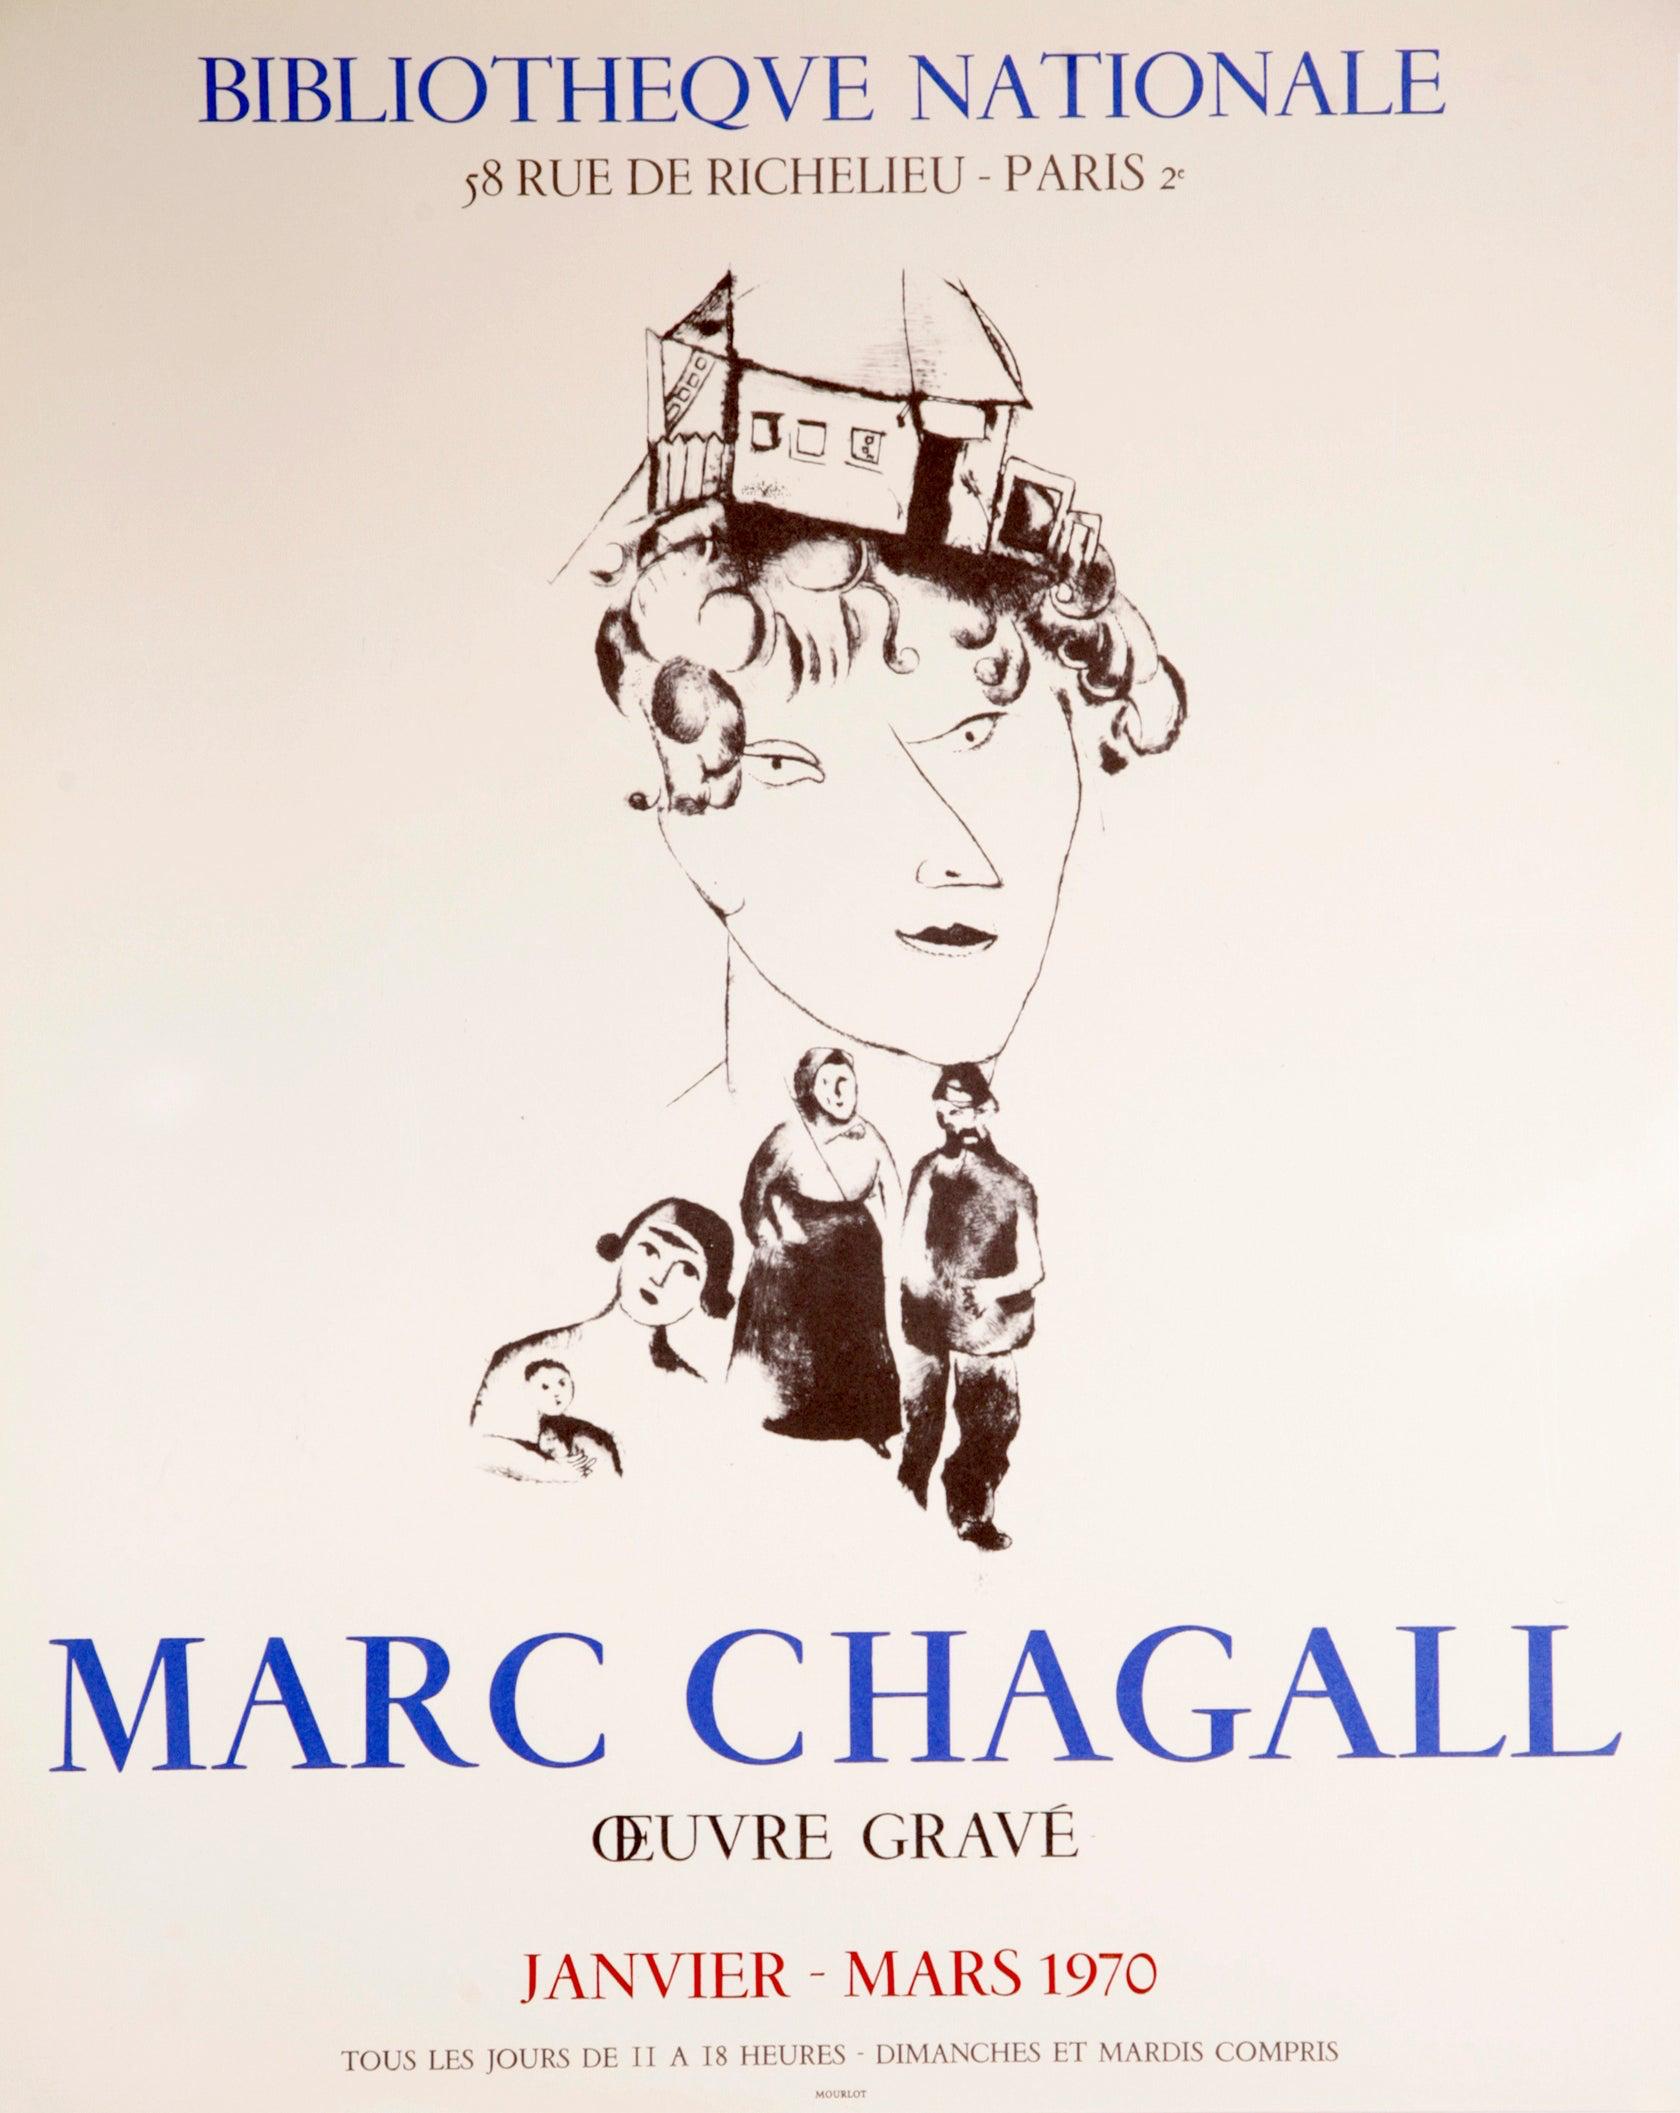 Artist: Marc Chagall

Medium: Lithographic Poster, 1970

Dimensions: 22 x 17.7 in, 56 x 45 cm

Classic Poster Paper - Perfect Condition A+

This lithographic poster was produced for an exhibition of Marc Chagall's prints at the Bibliothèque